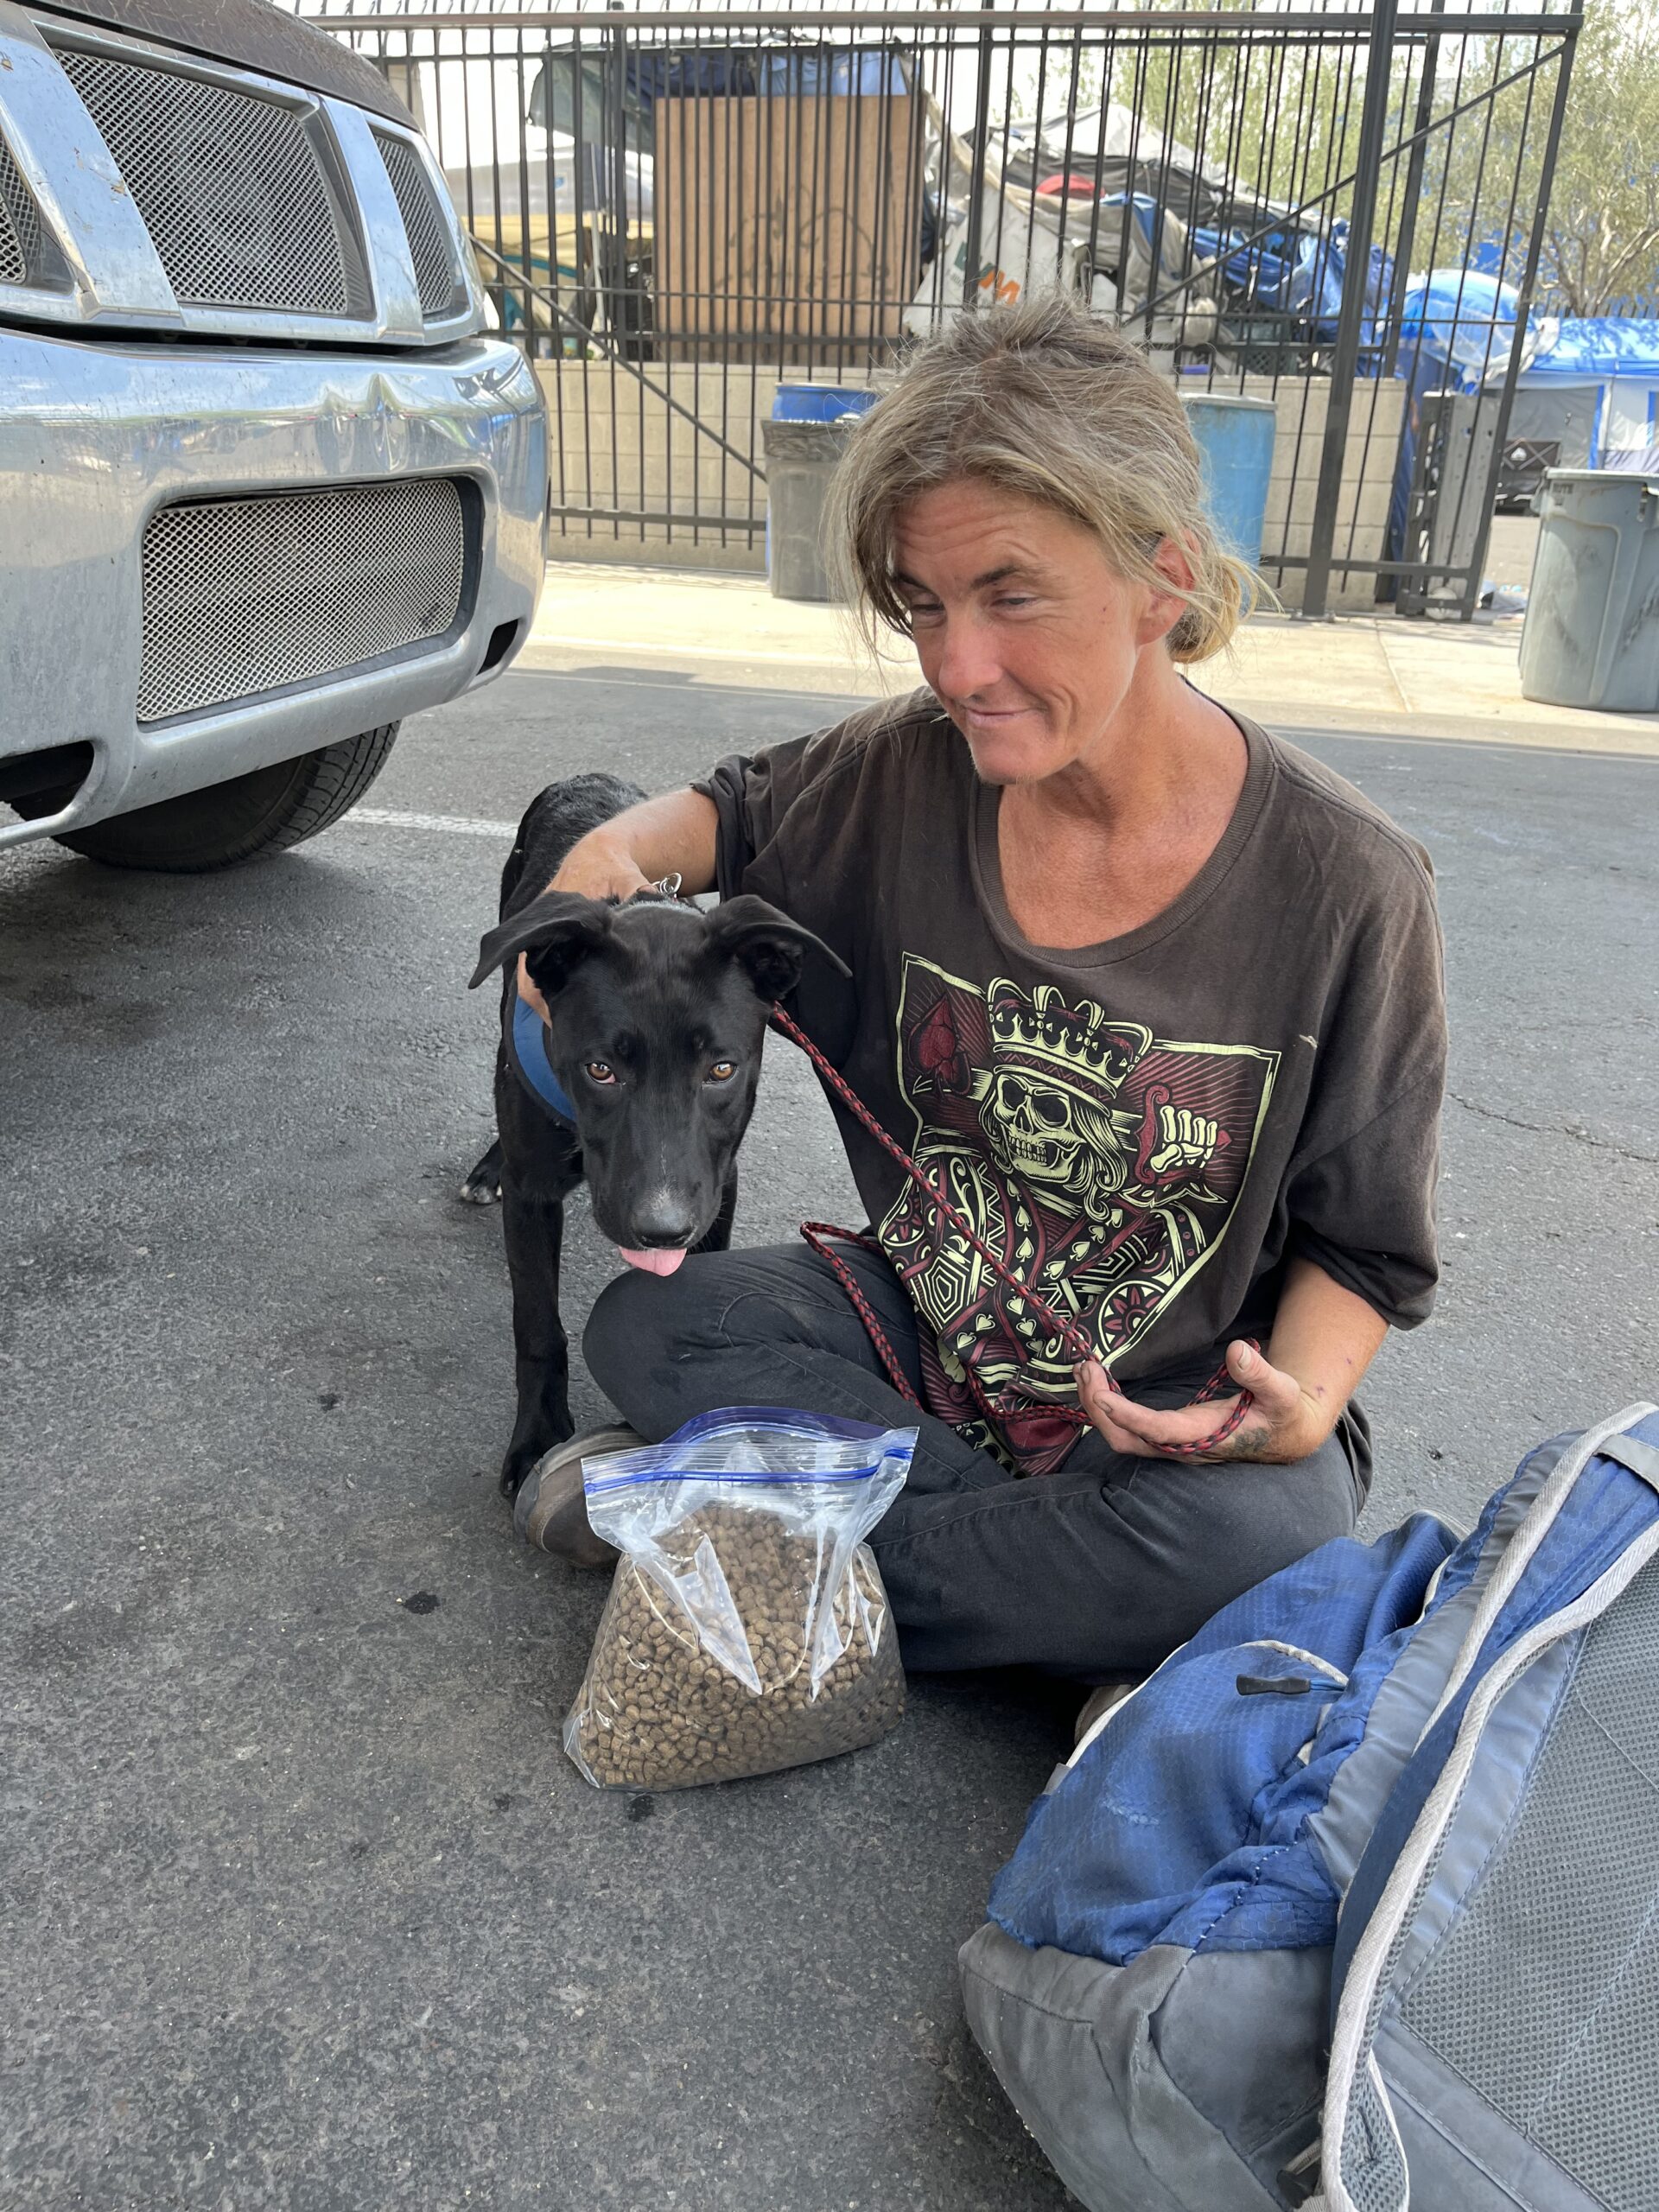 woman sitting with her dog on the ground next to bag of dog food